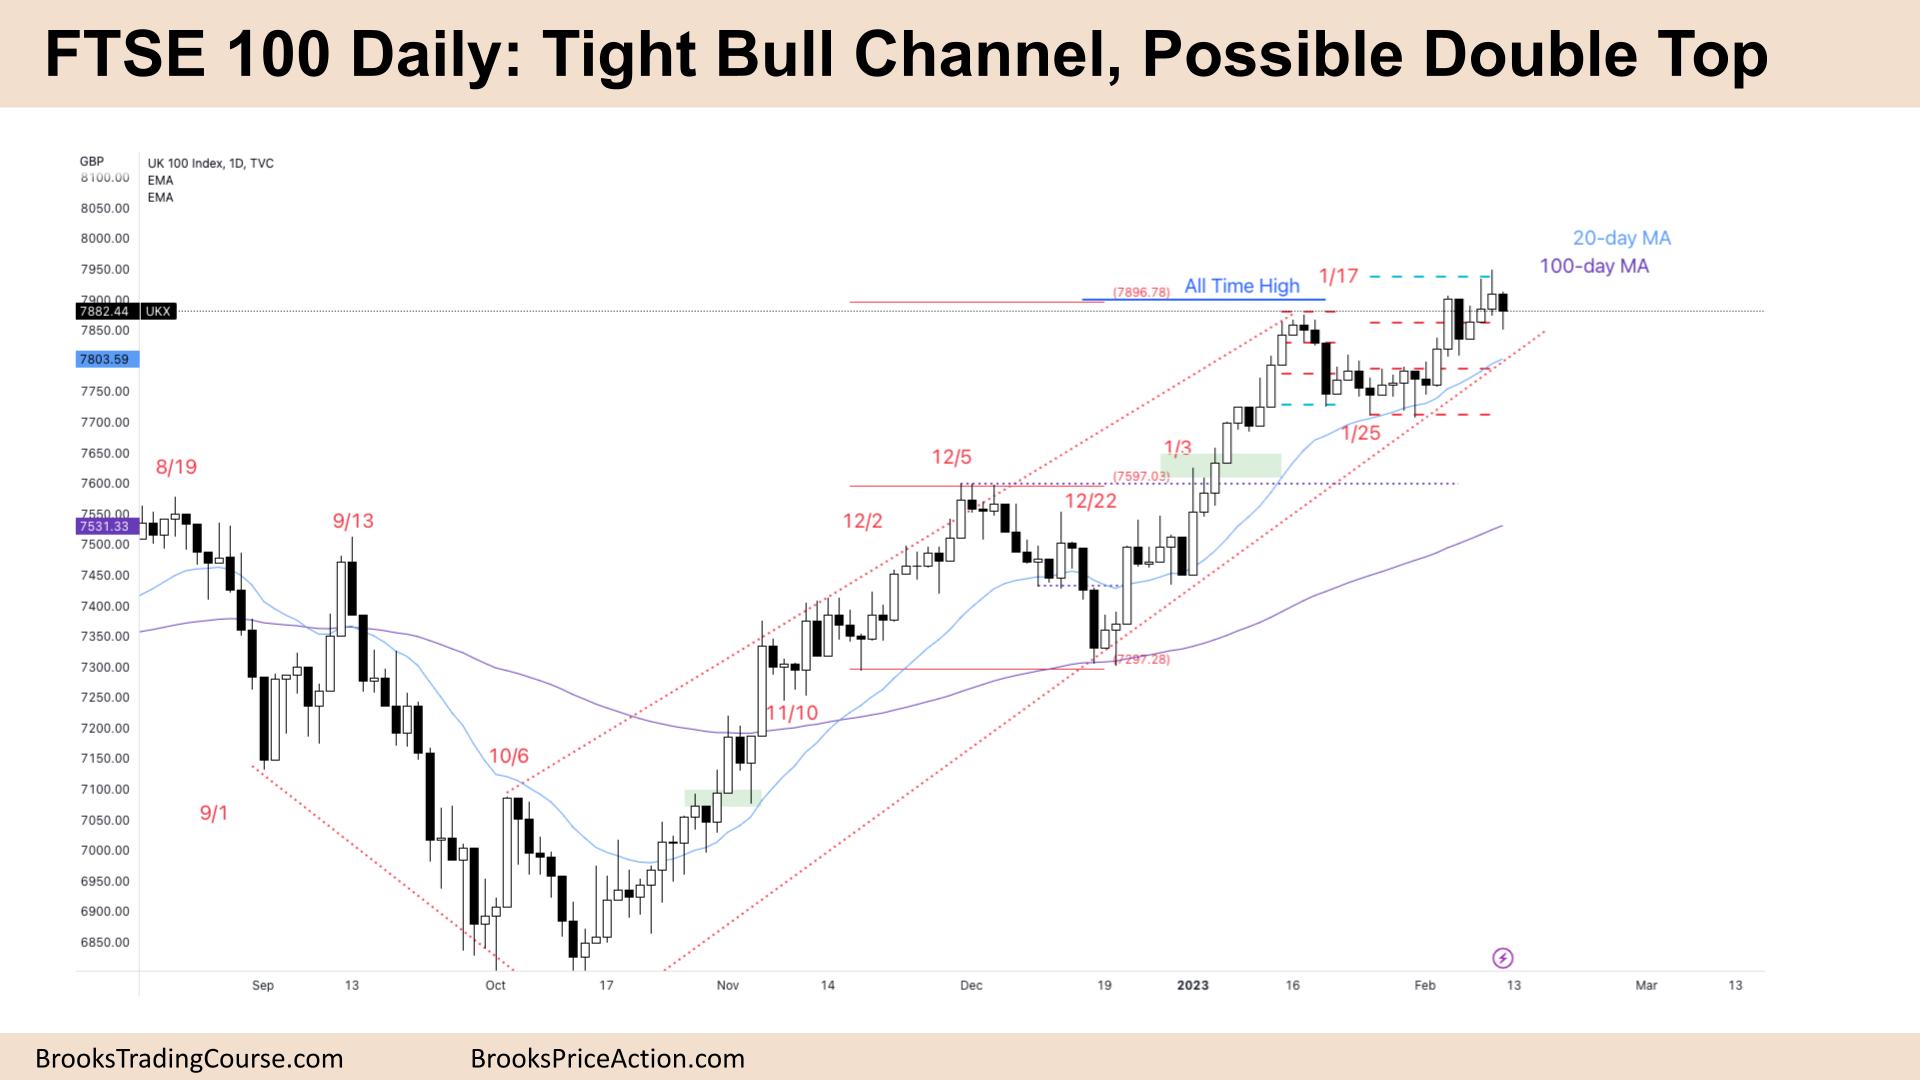 FTSE-100 Tight Bull Channel Possible Double Top